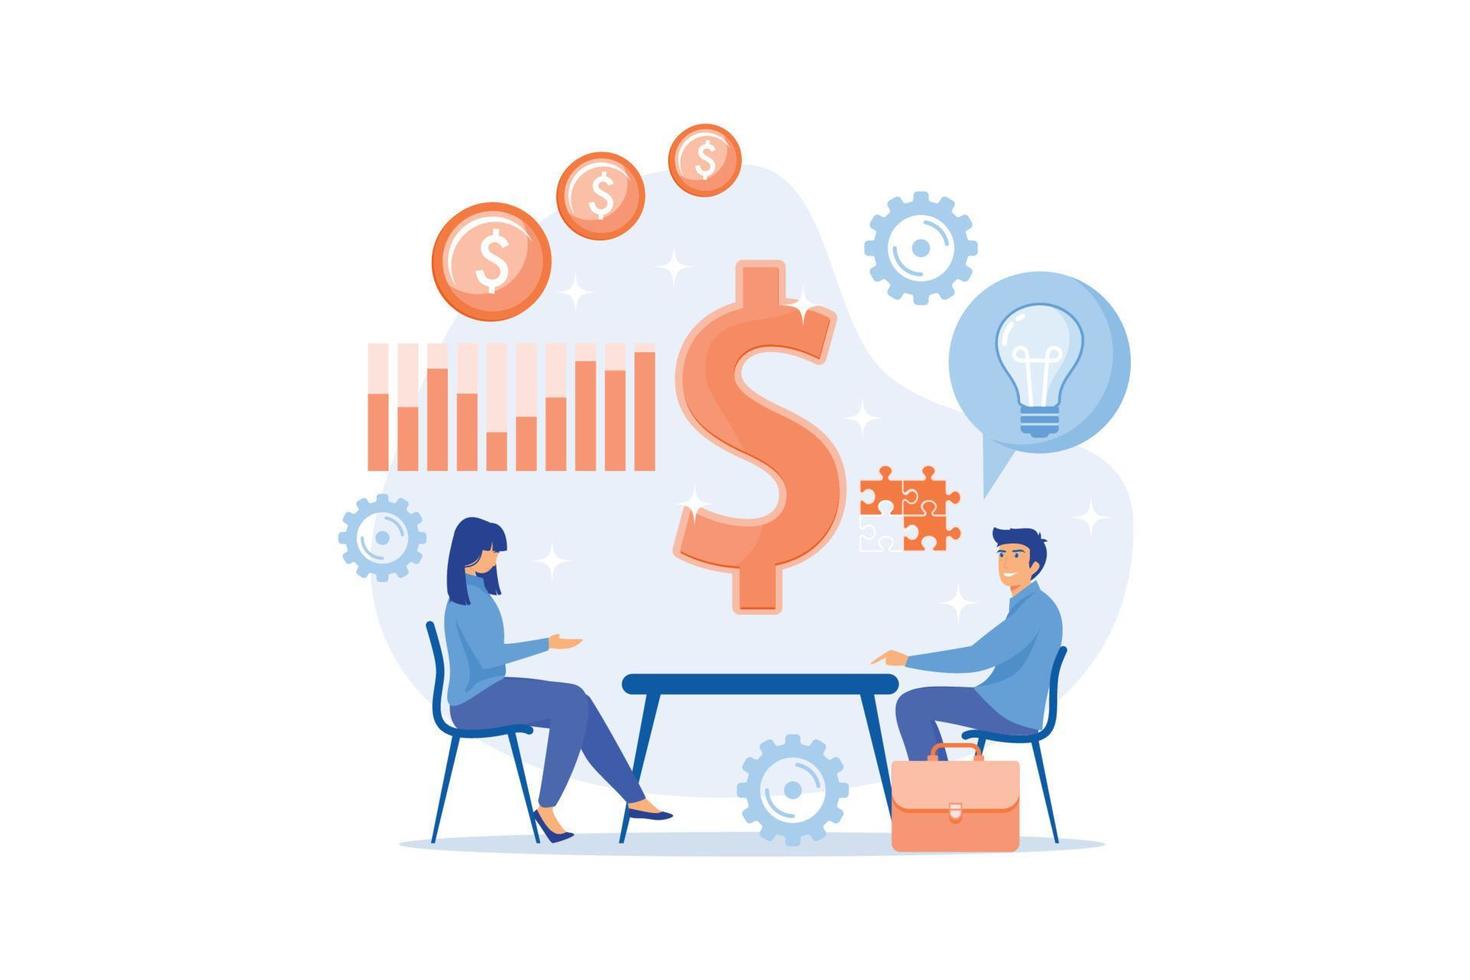 Salesperson suggesting a solution idea to consumers problem. Consultative sales, customer-oriented selling, trendy sales method concept.flat vector modern illustration